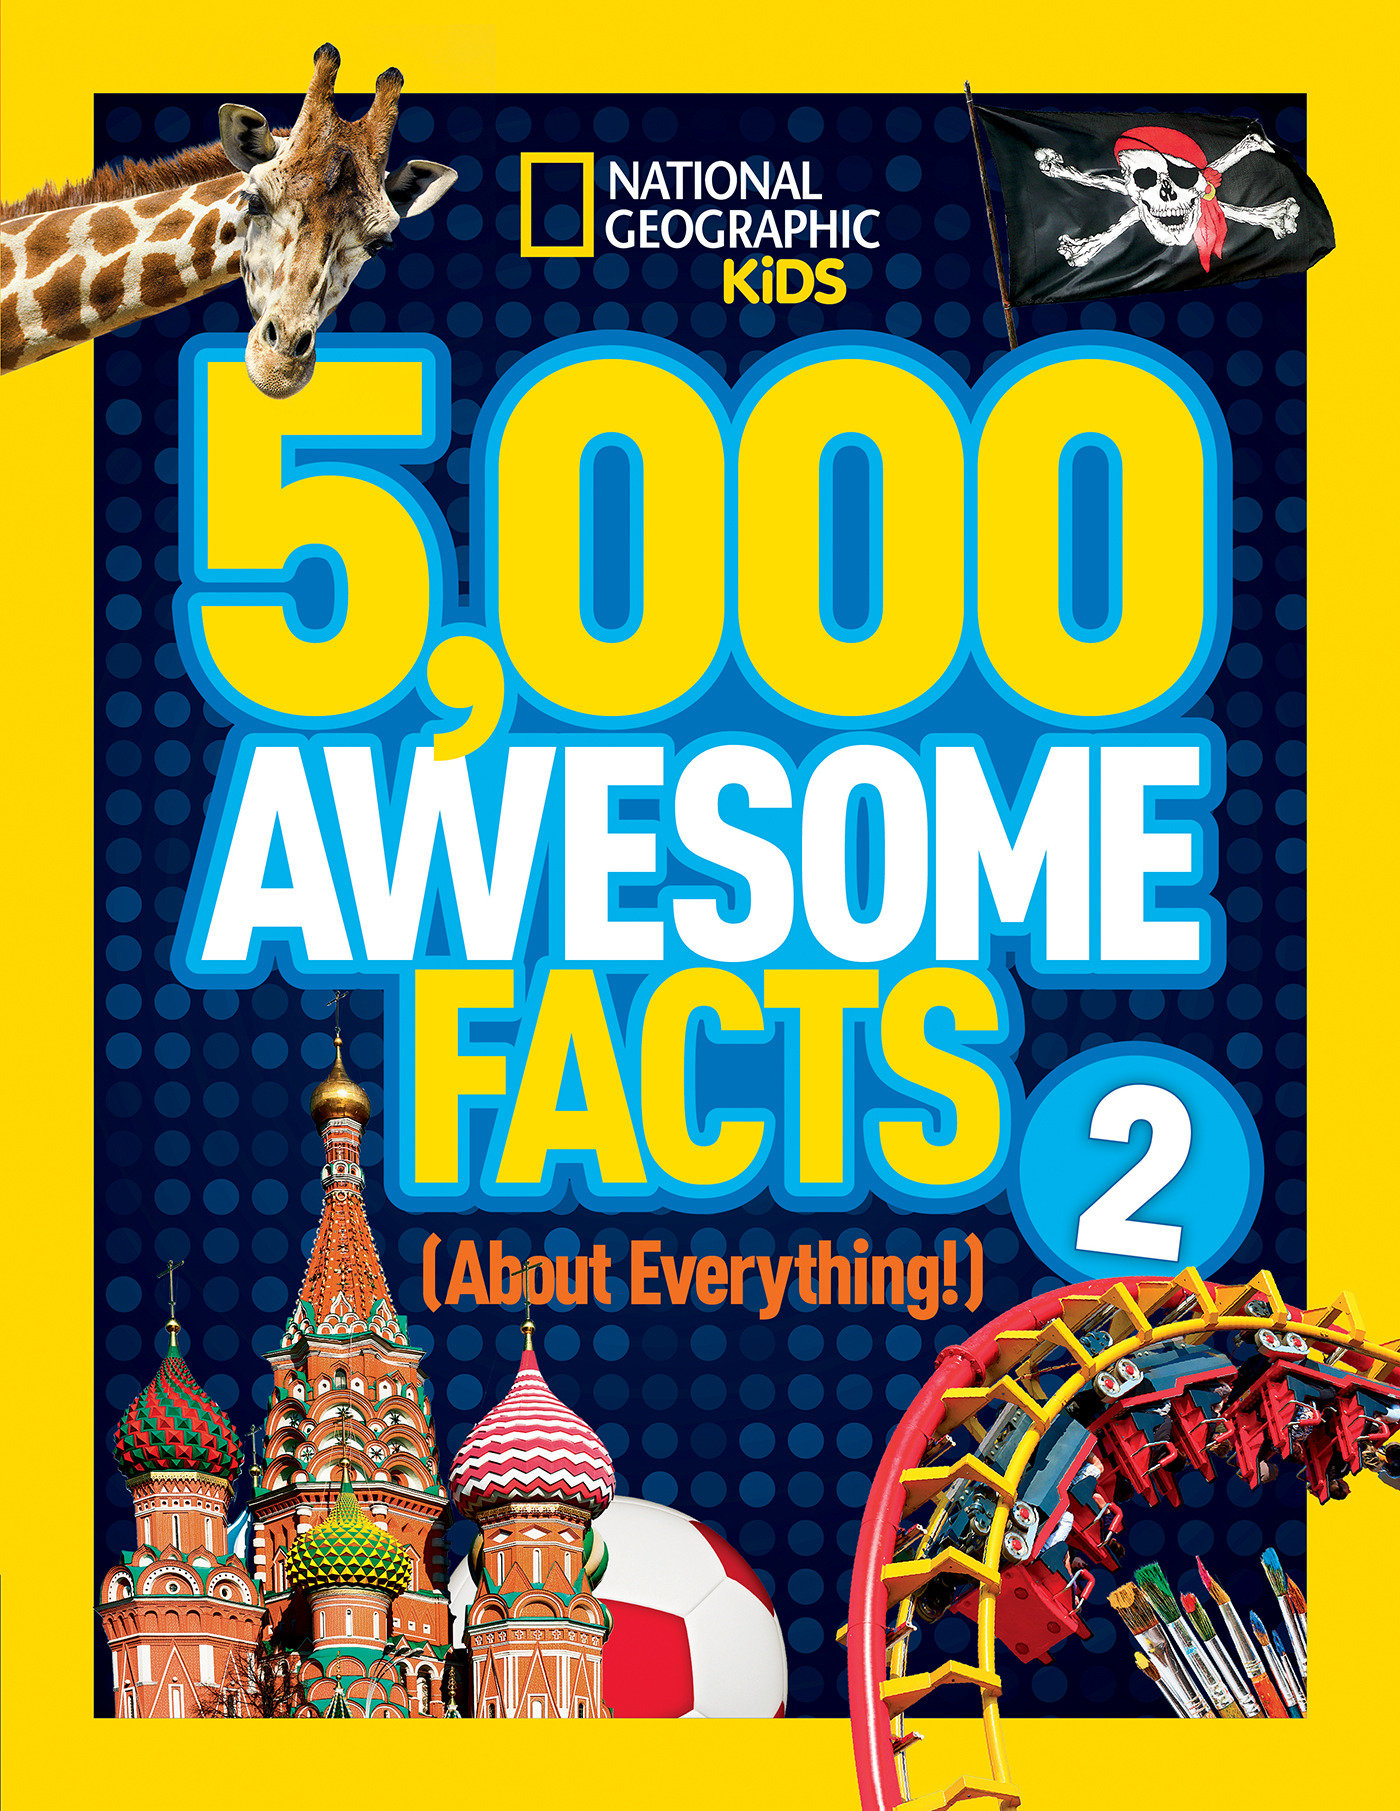 5,000 Awesome Facts (About Everything!) 2 (Hardcover Book)